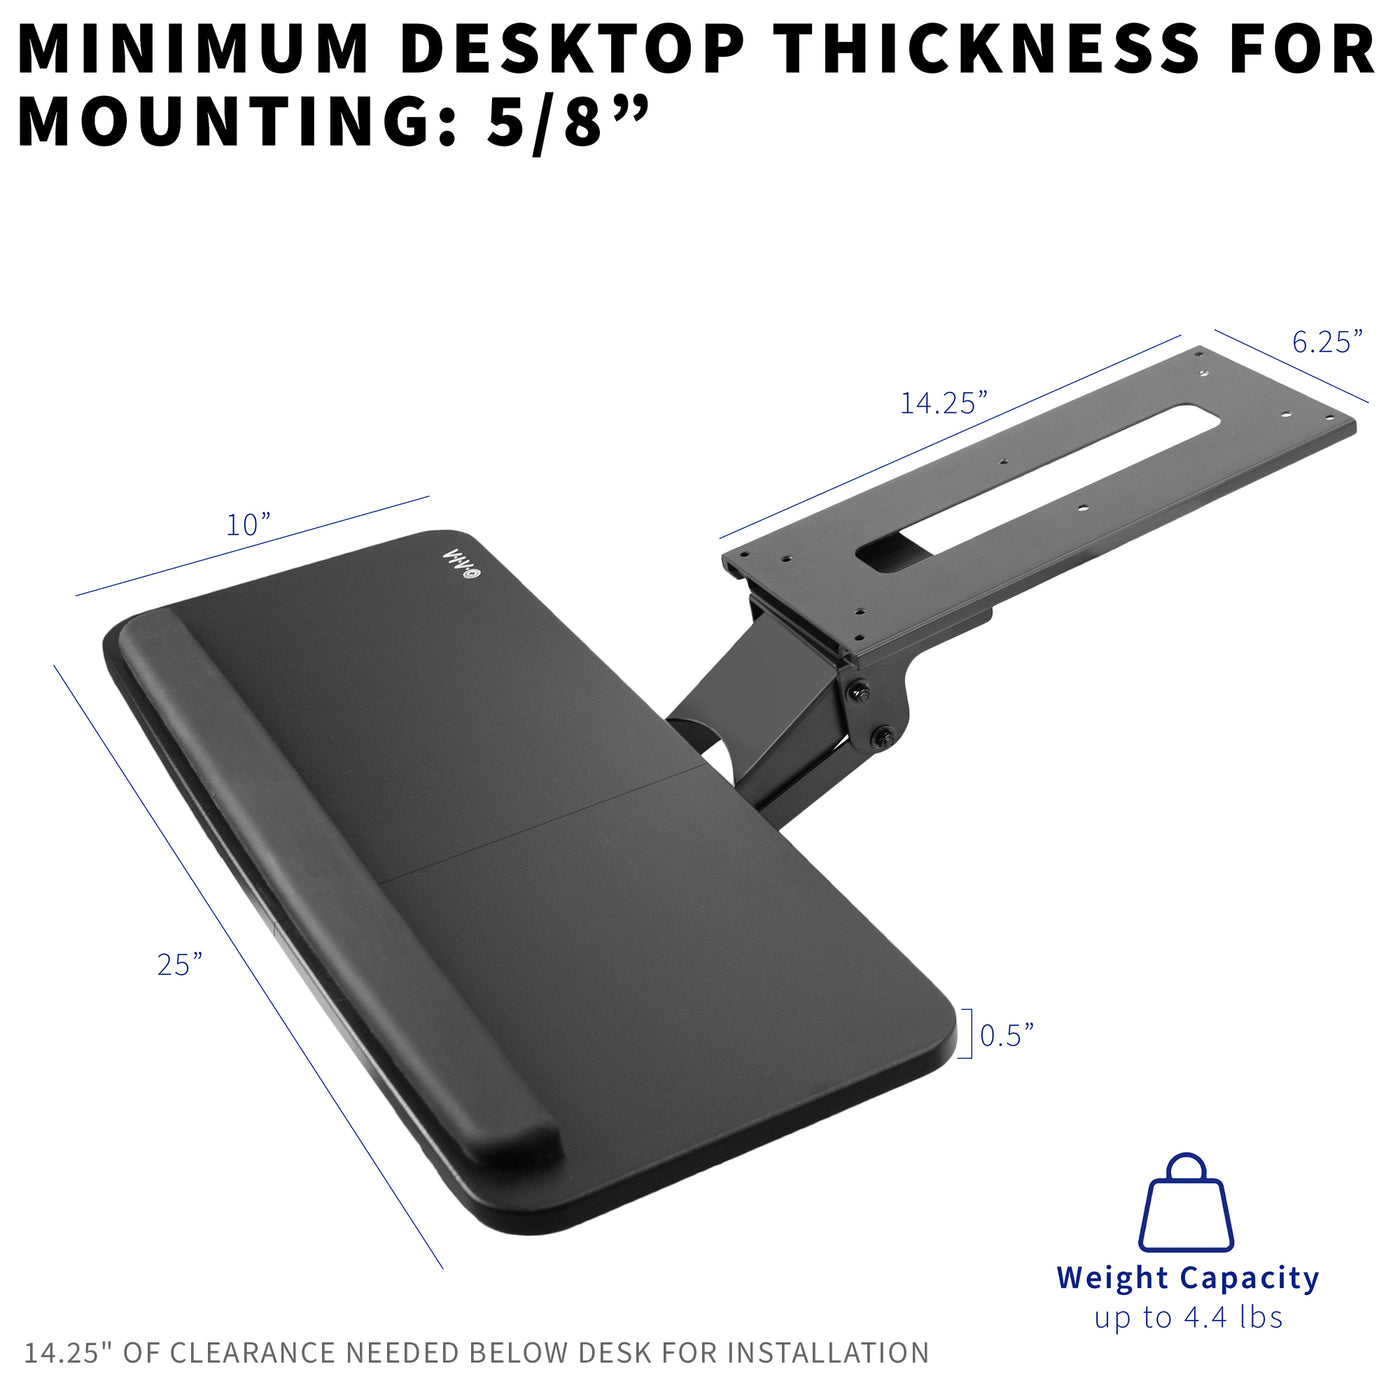 Ergonomic under desk keyboard tray mount with comfortable tilting angles for typing.